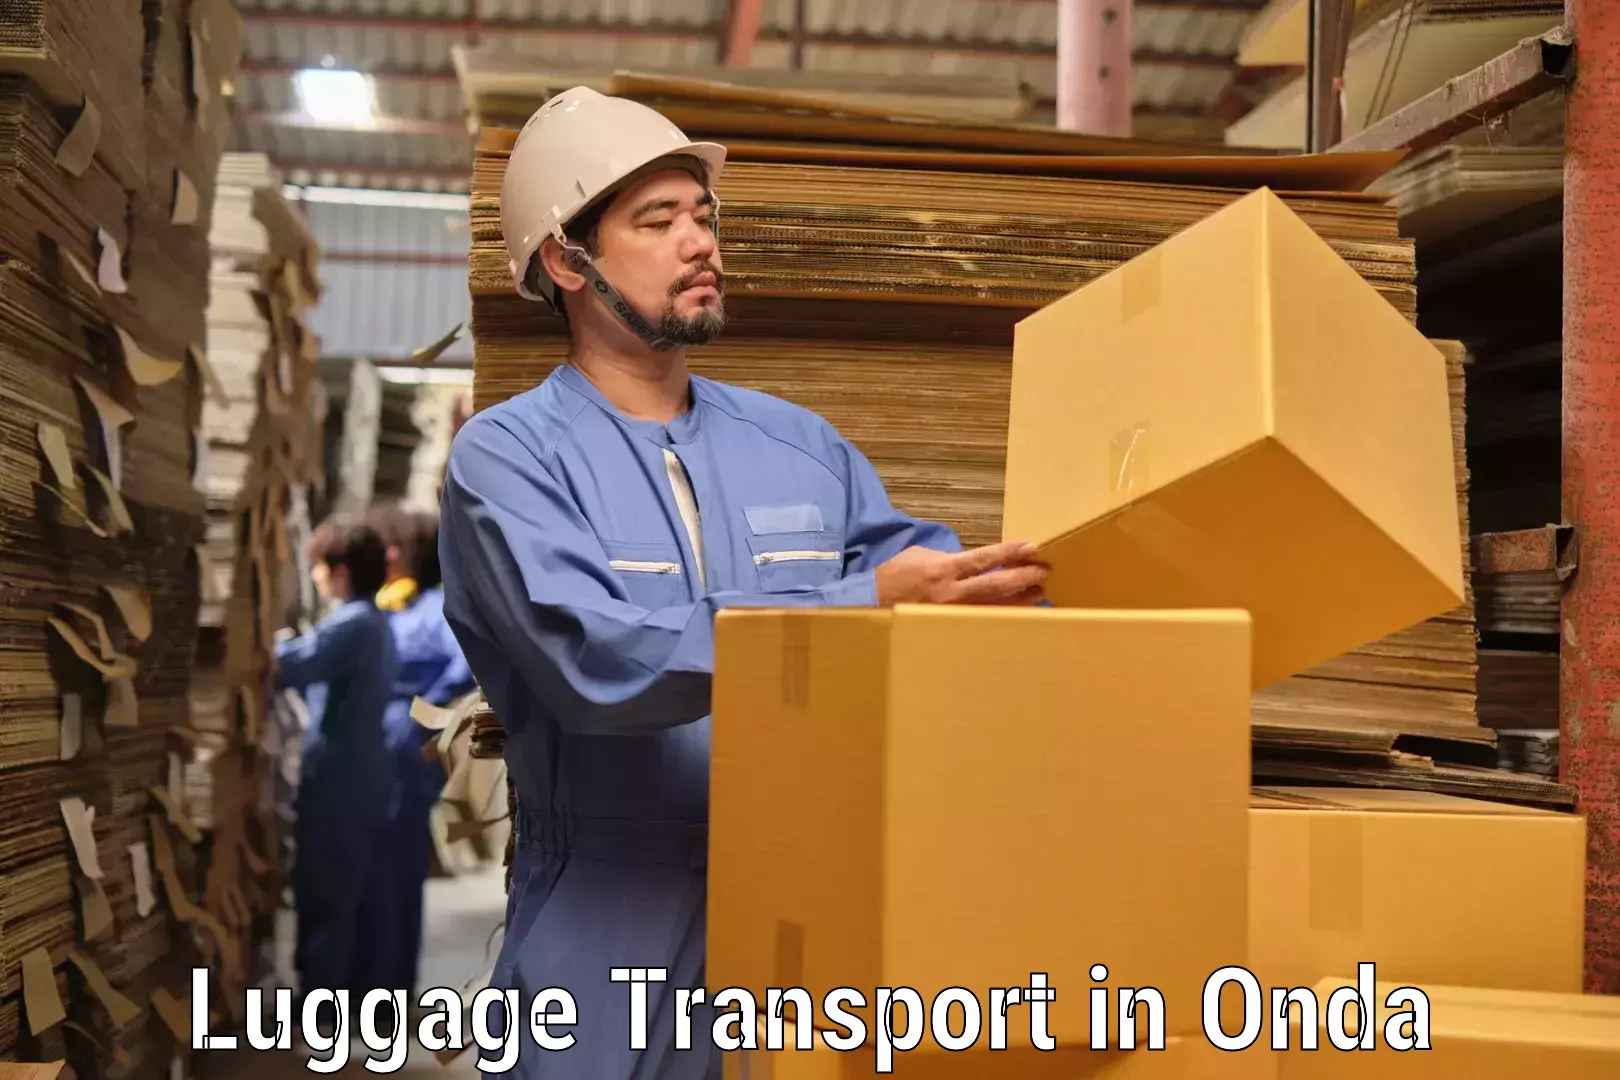 Luggage delivery operations in Onda